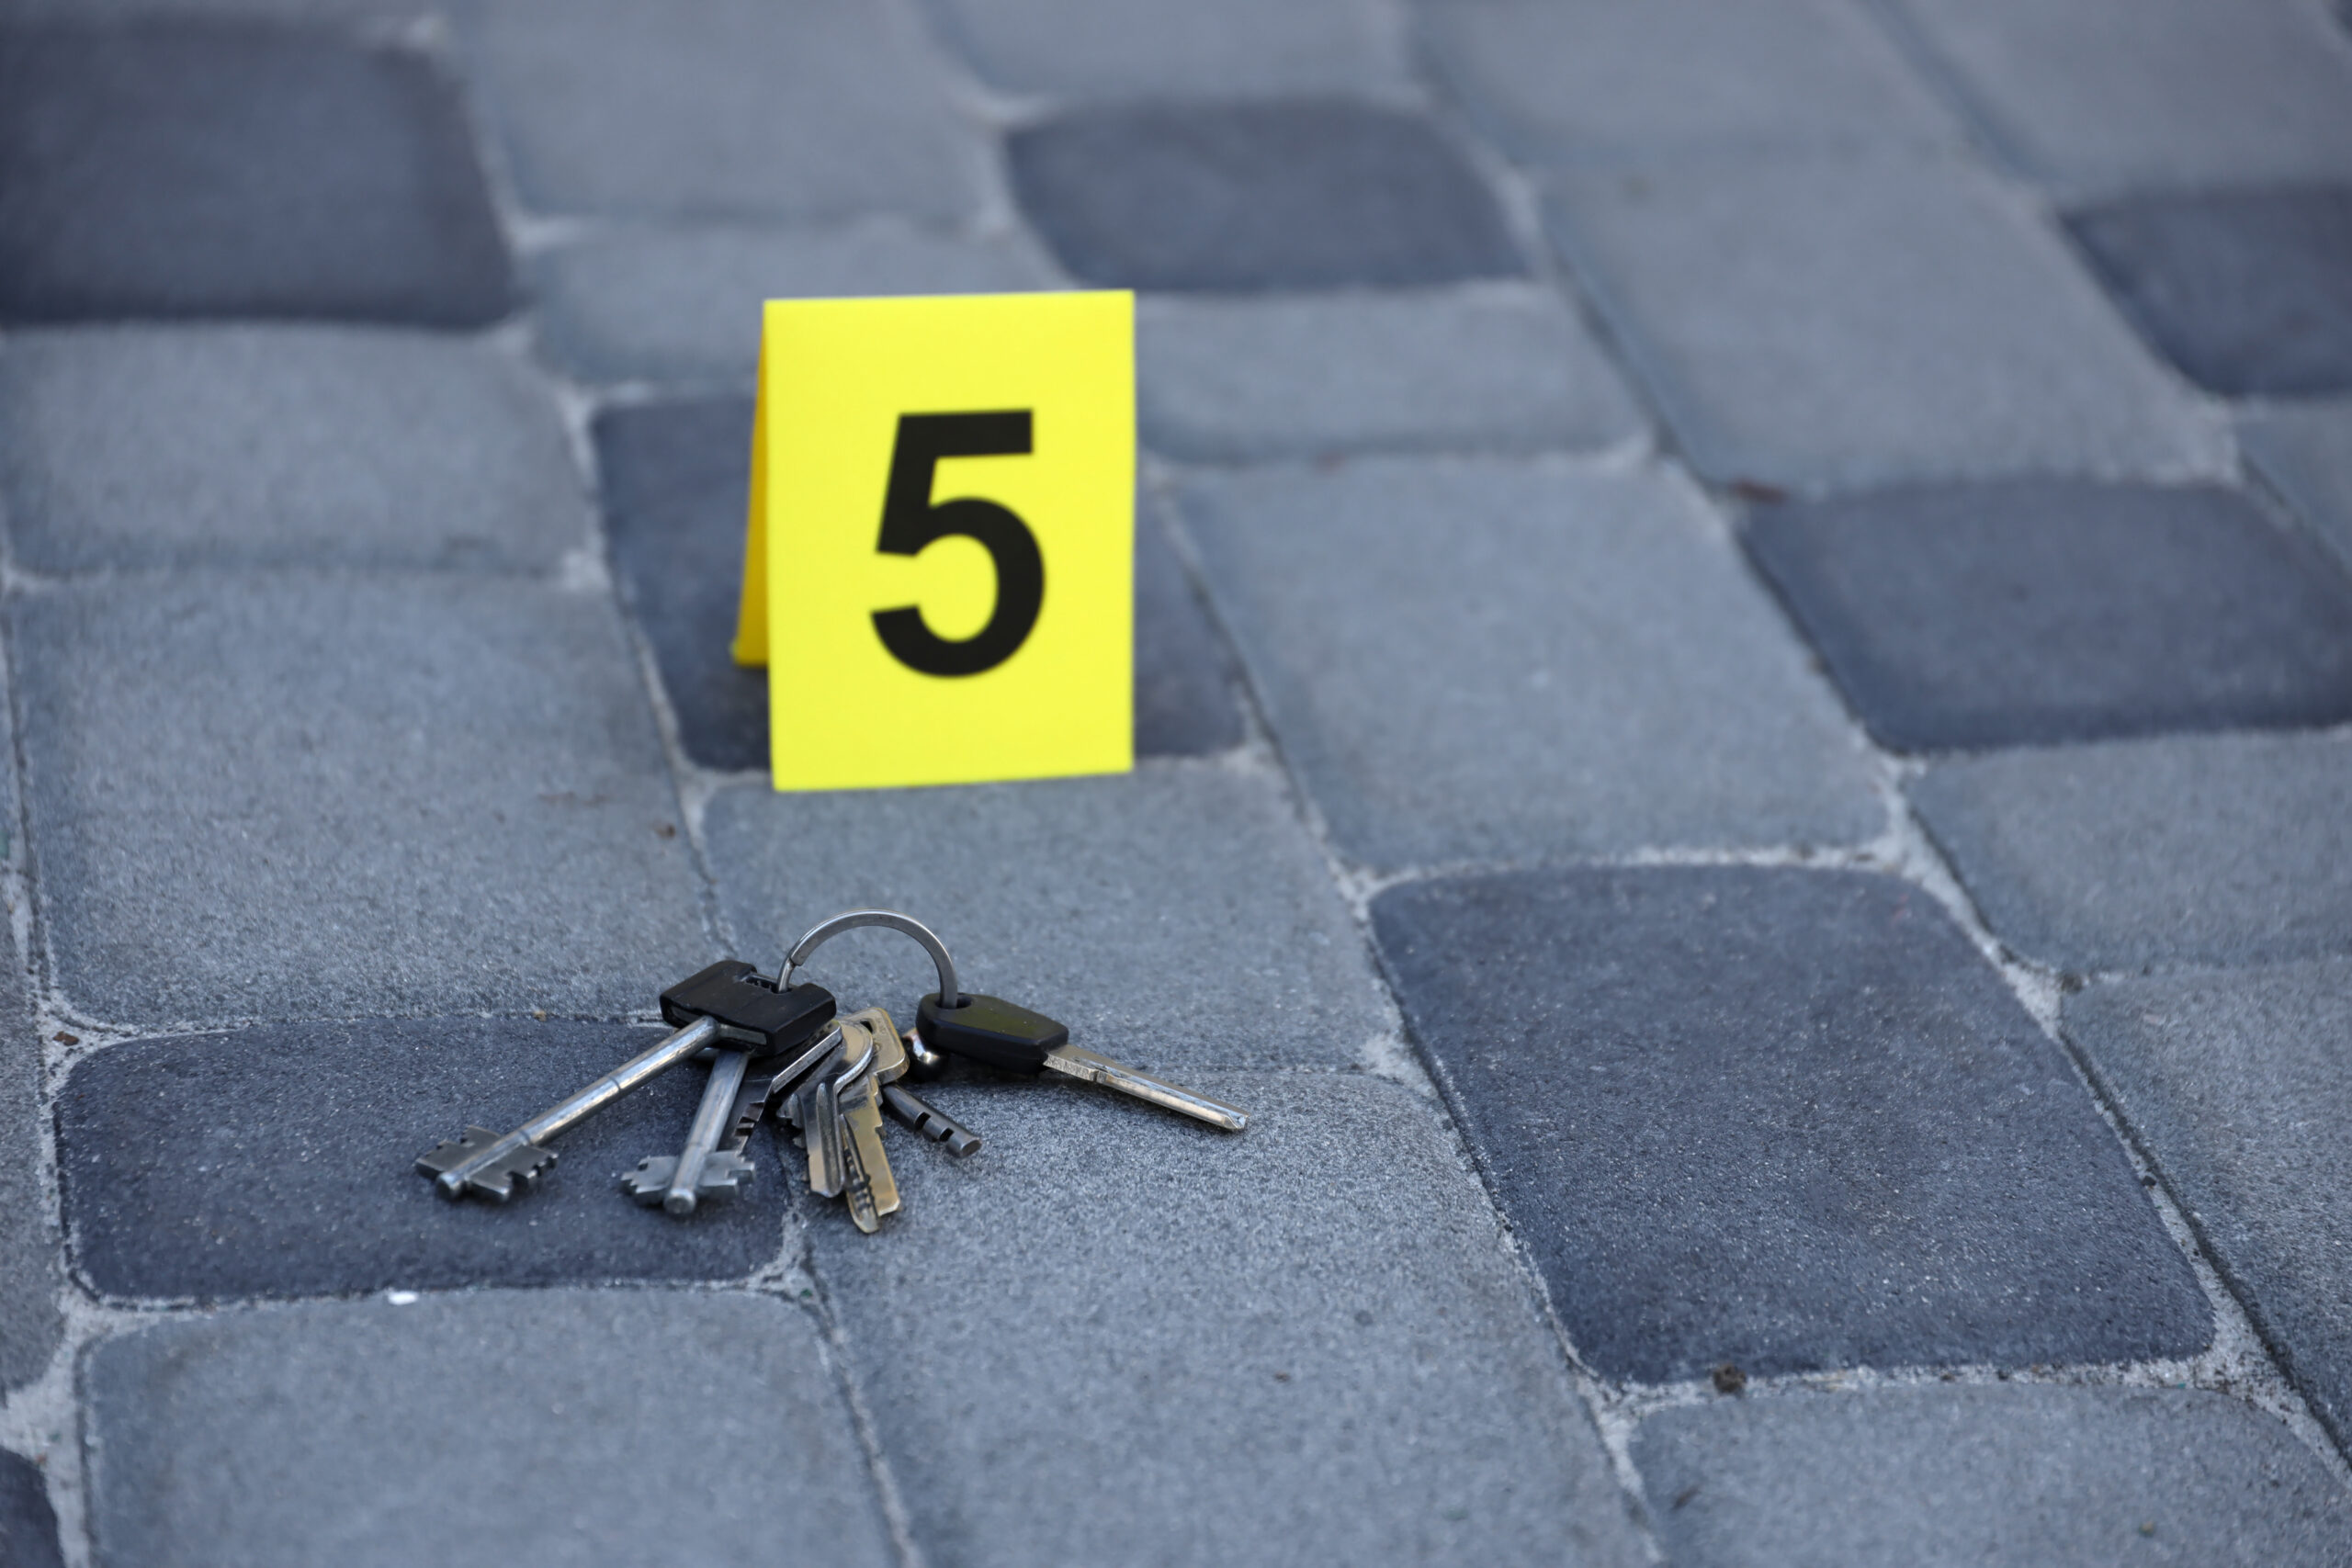 Collecting Crucial Evidence for Your Personal Injury Case